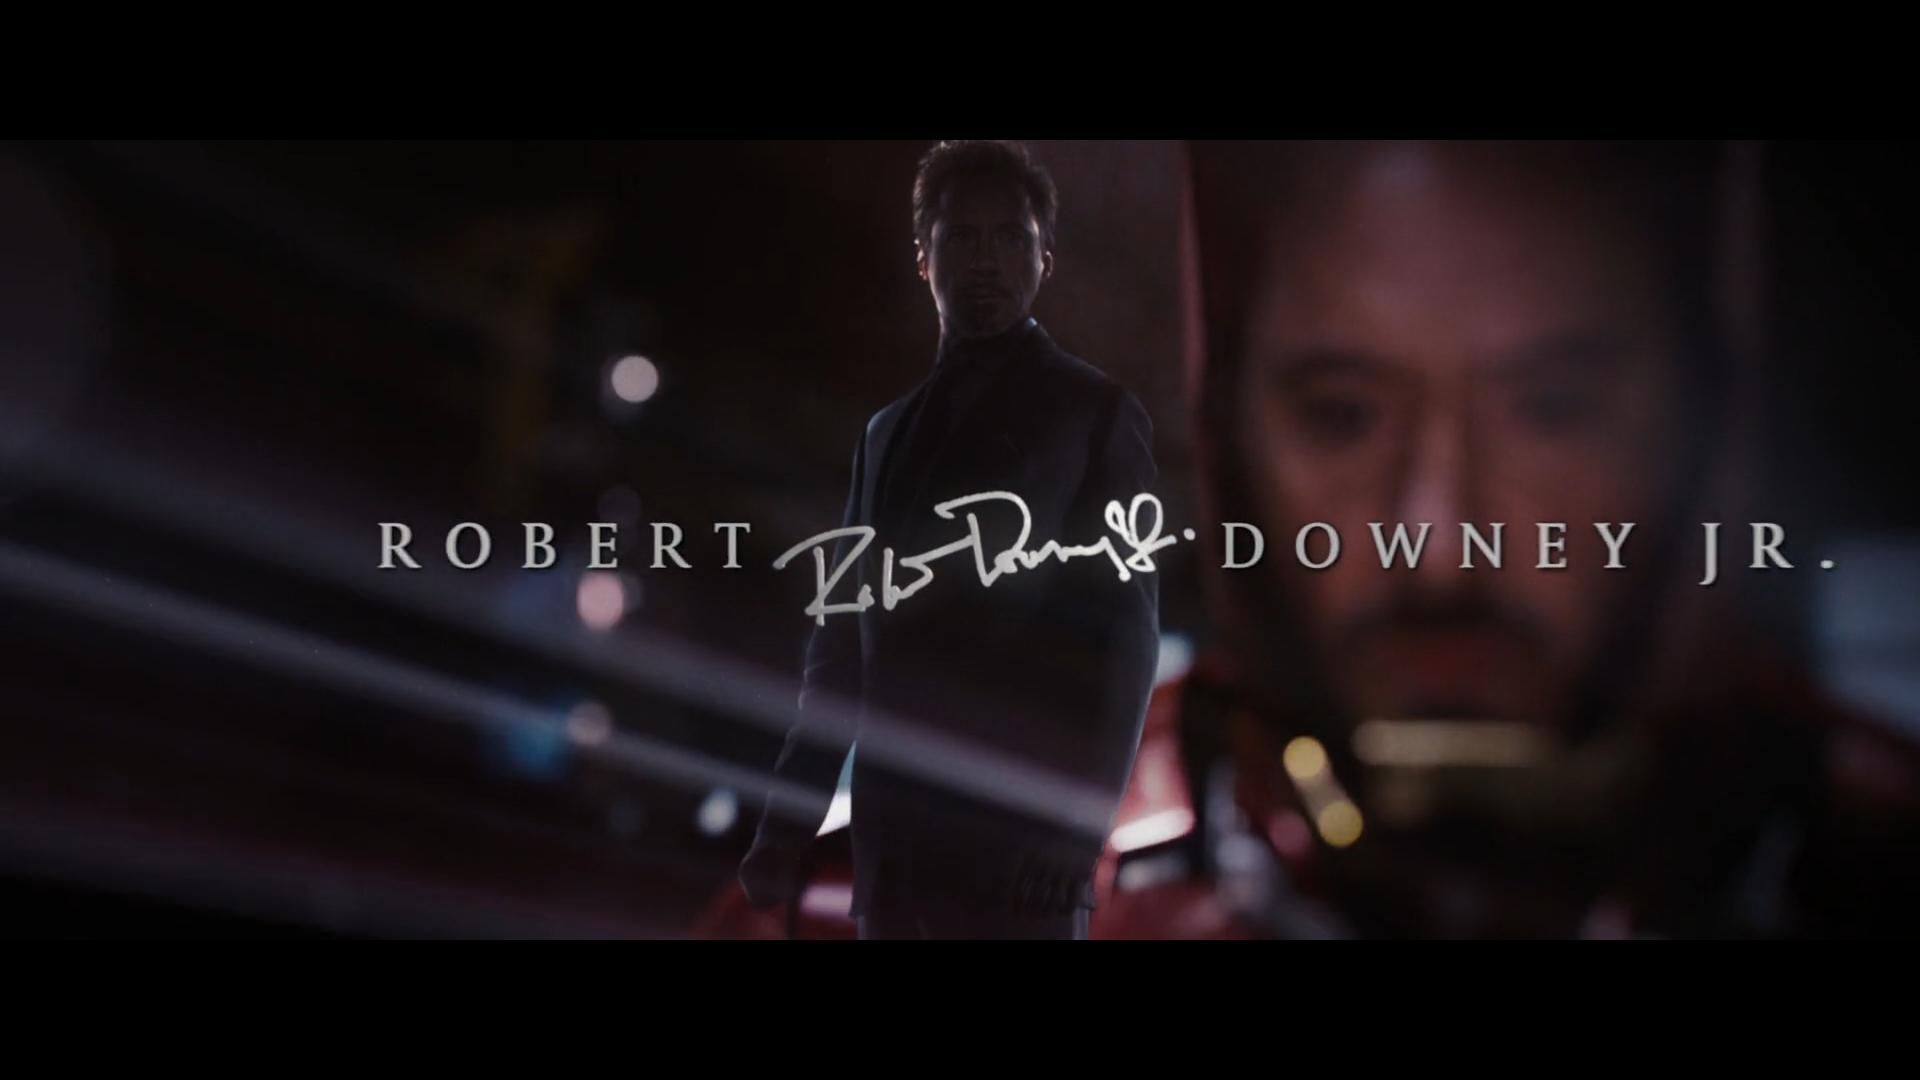 During the credits of Avengers: Endgame (2019) you can see Tony Stark and Robert Downey Jr.'s signature revealing that Ro. Downey junior, Robert downey jr, Downey